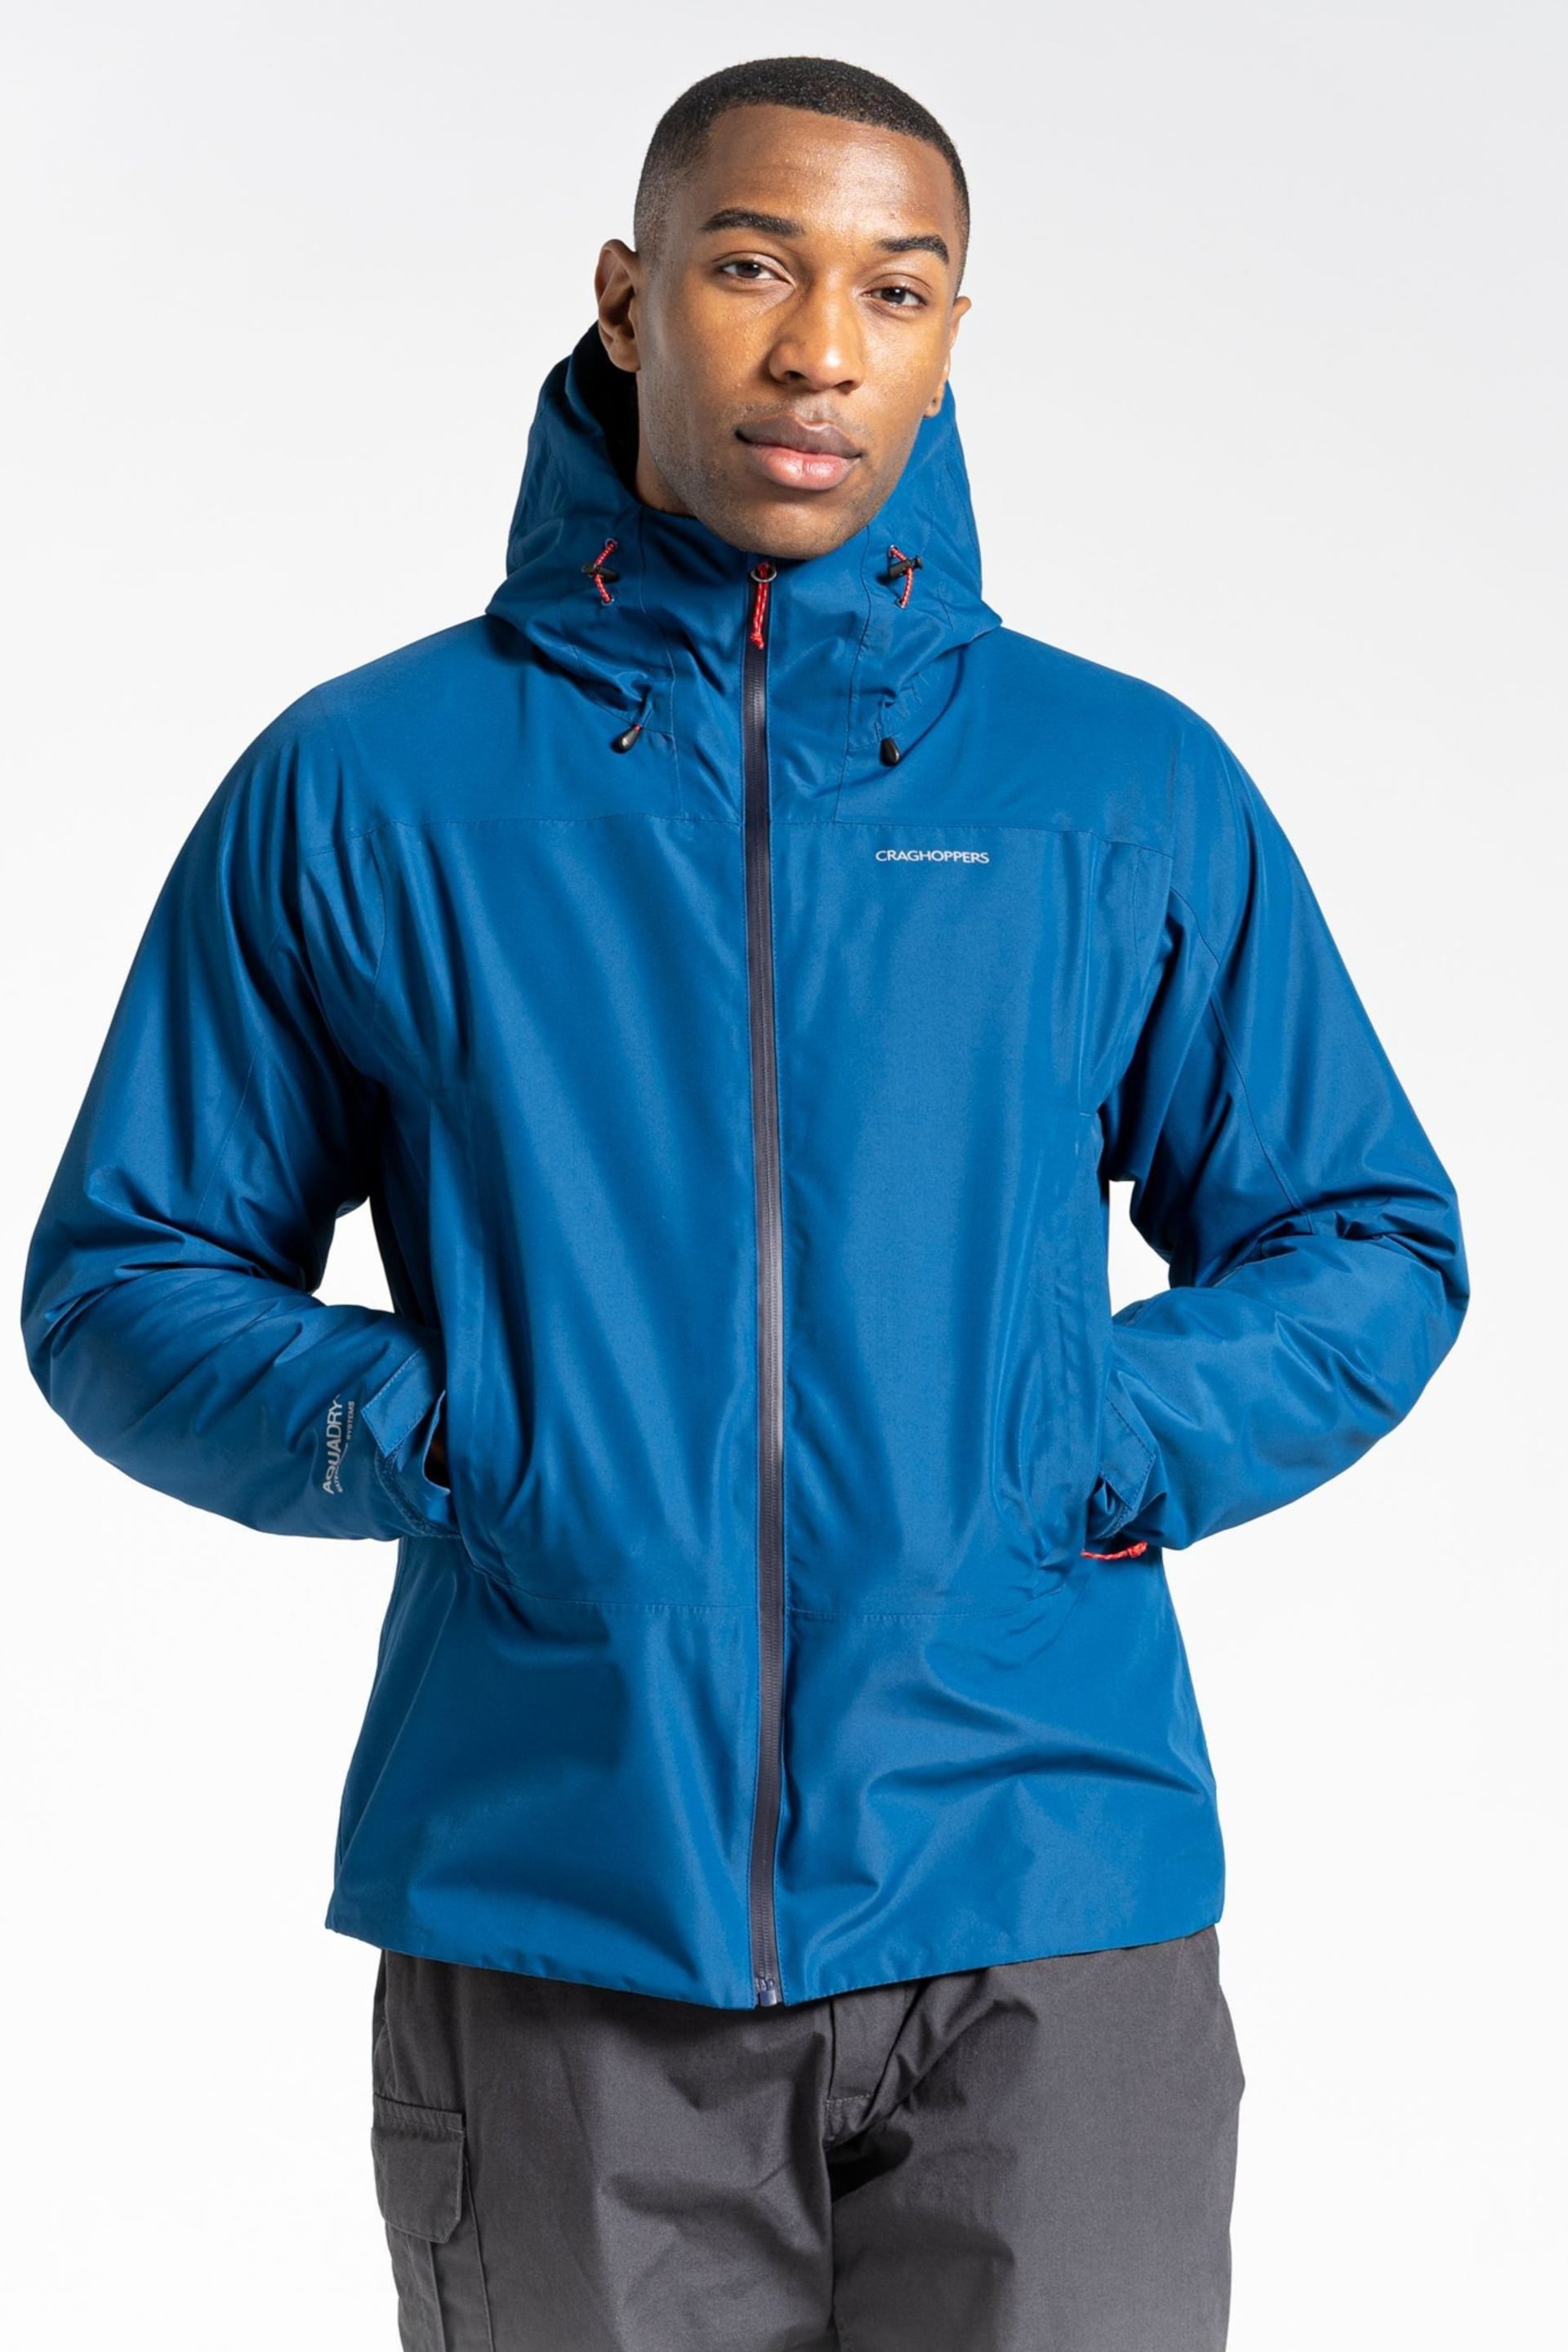 Craghoppers Blue Creevey Jacket - Image 4 of 14